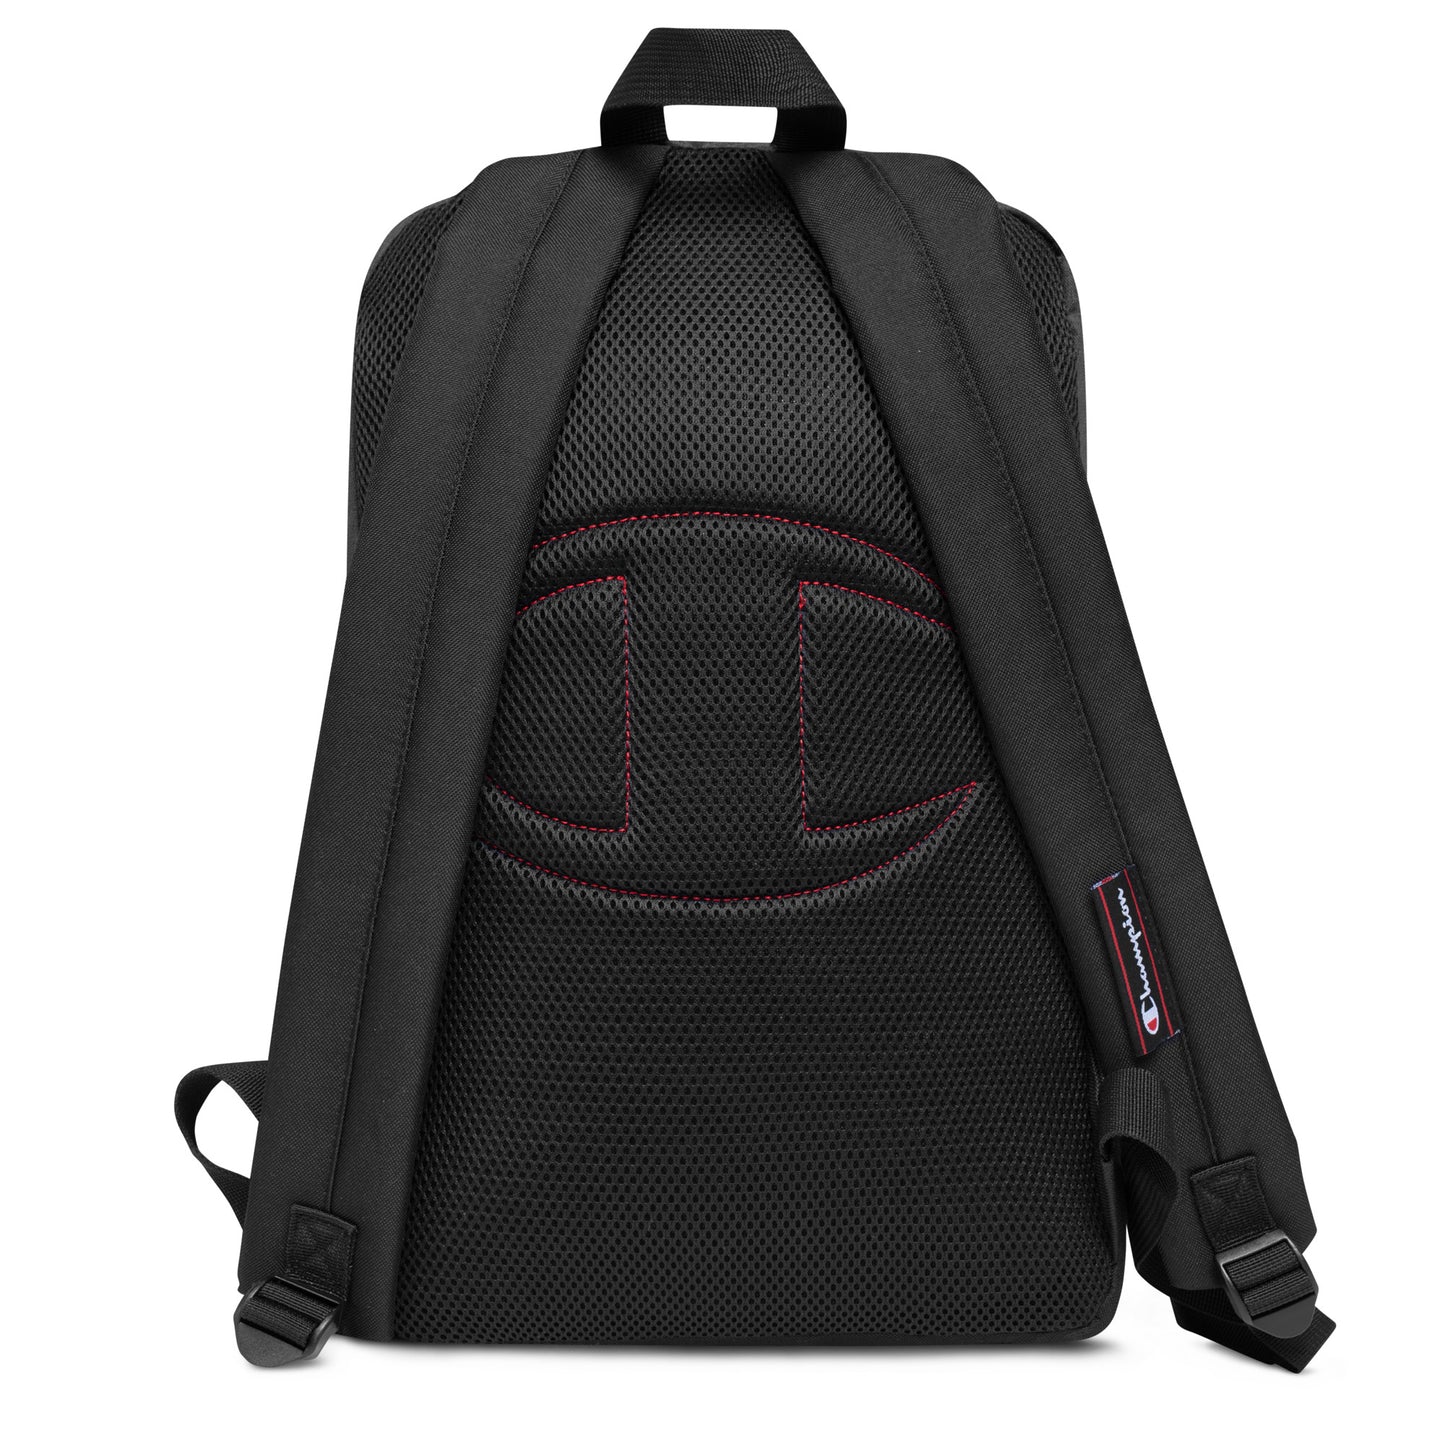 The Mean Extreme Apex Embroidered Champion Backpack